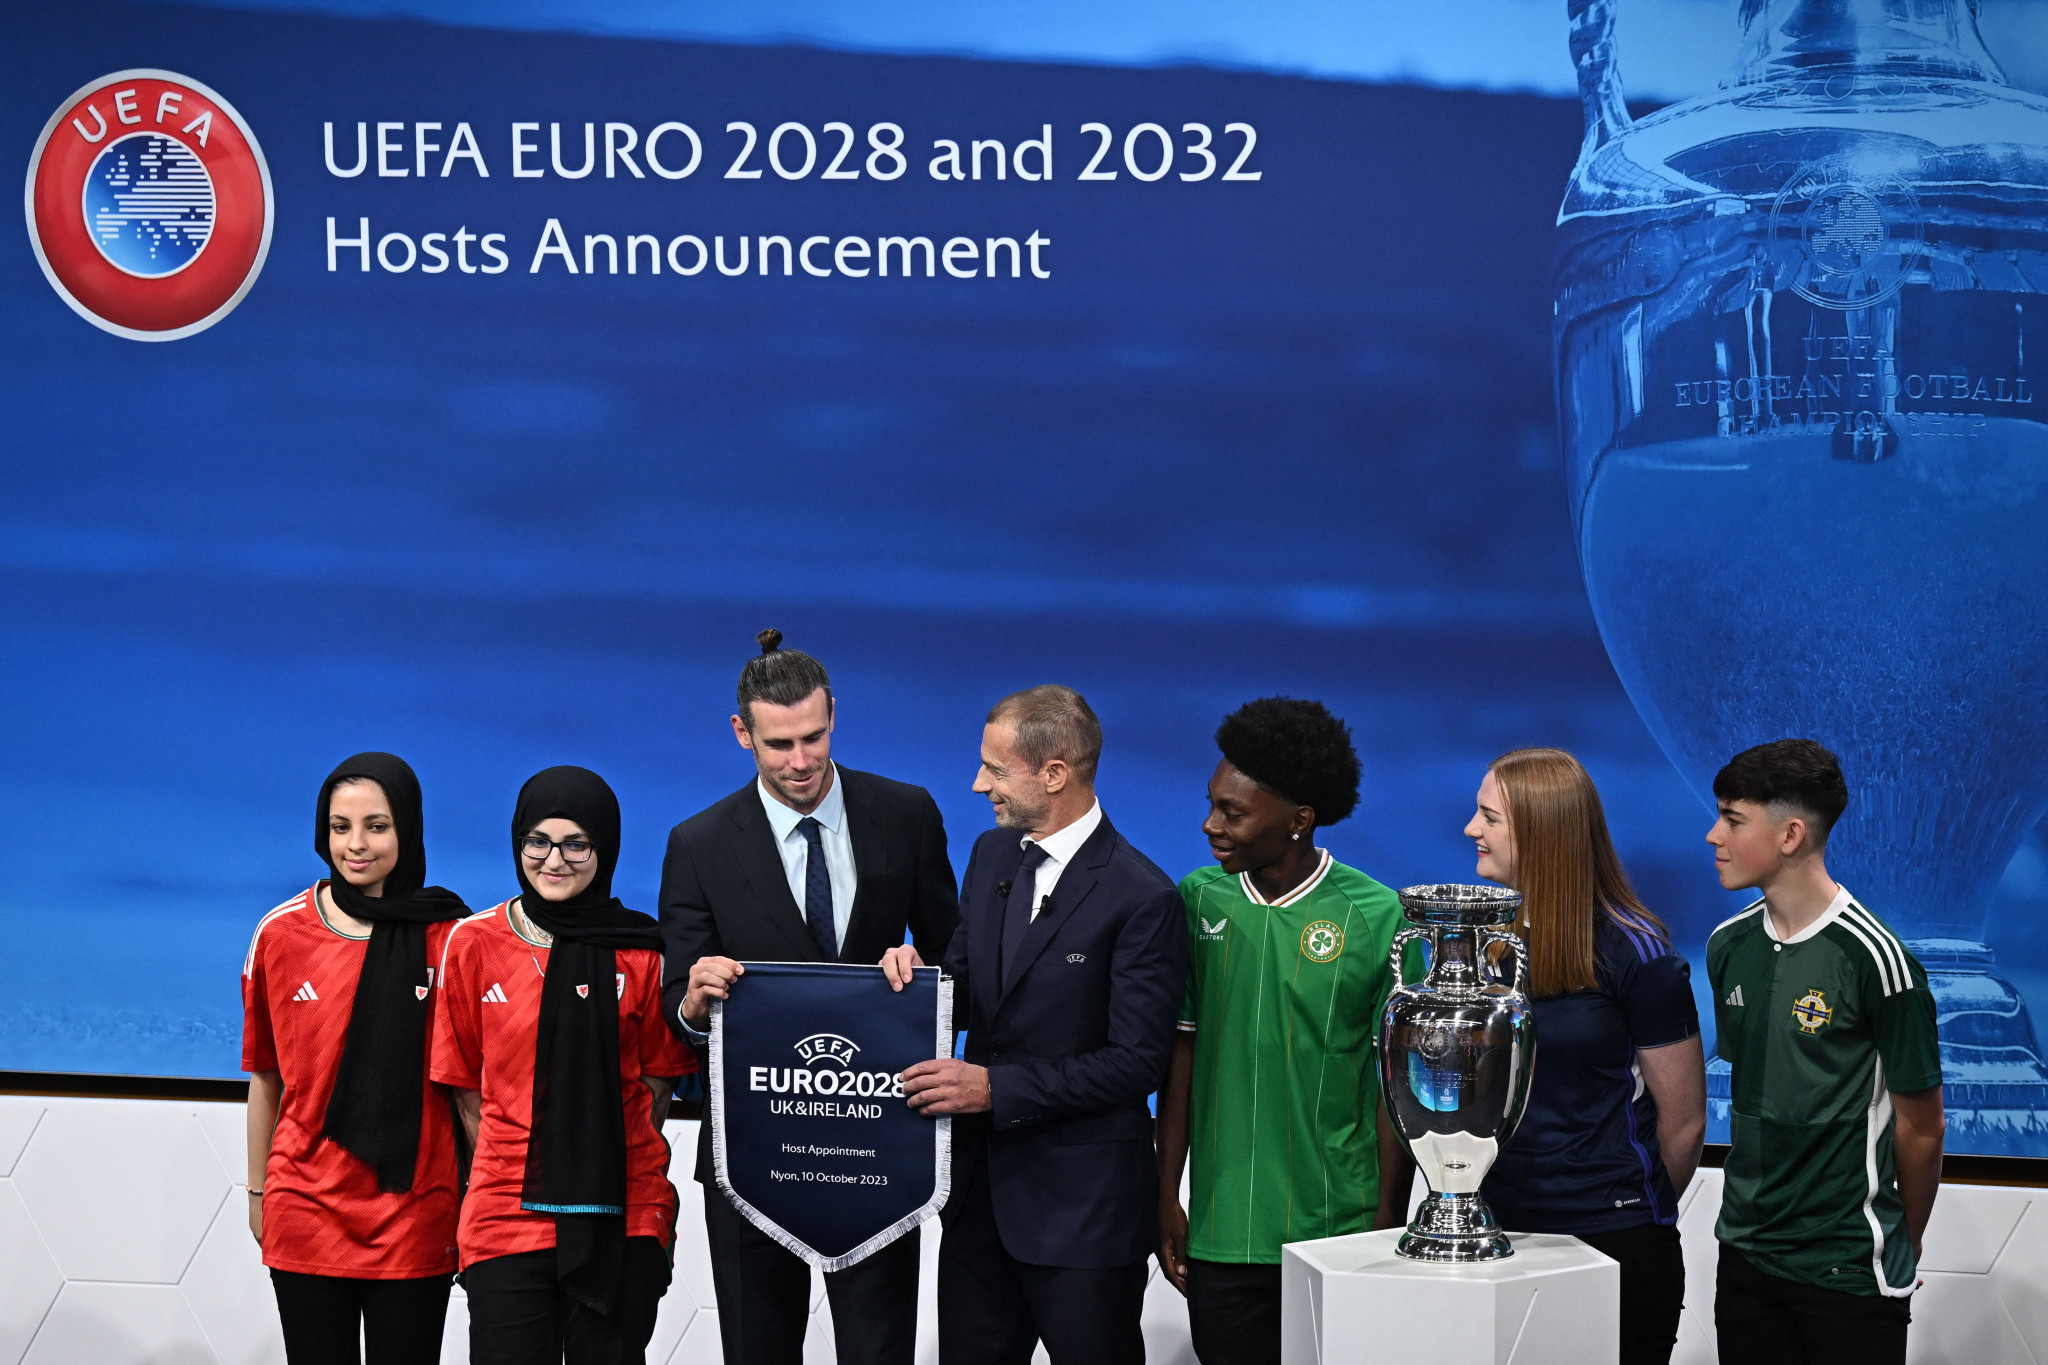 UK and Ireland confirmed as UEFA Euro 2028 hosts, Italy and Turkey get 2032 edition